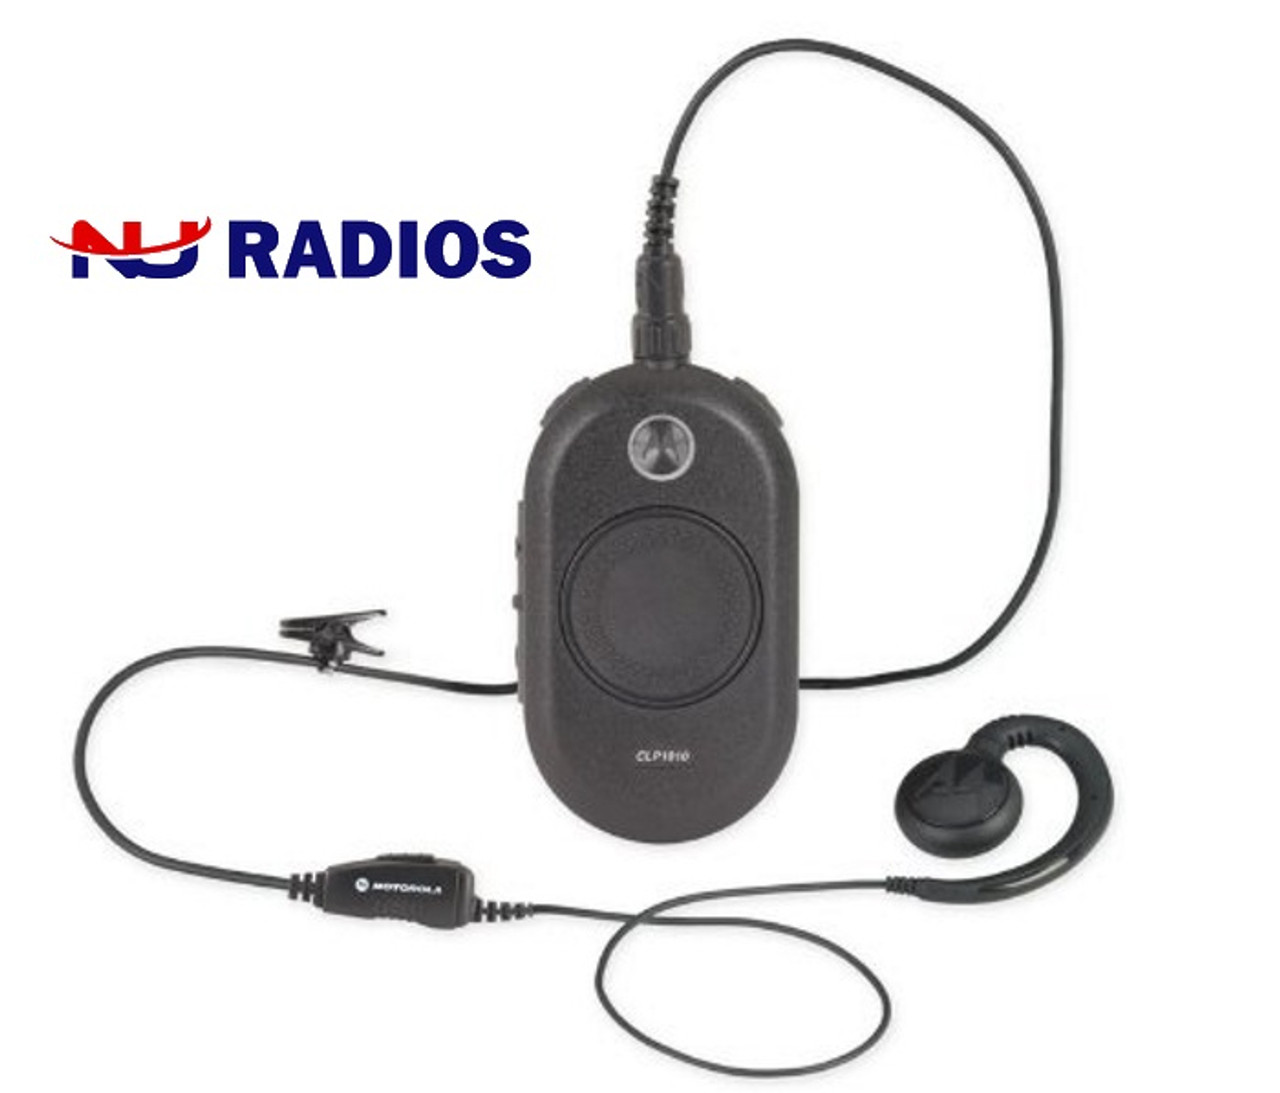 Motorola CLP-1080e UHF 8CH 2-Way Radio for business is tiny, 2.38 ounces.  Great for your office, retail store or hotel.